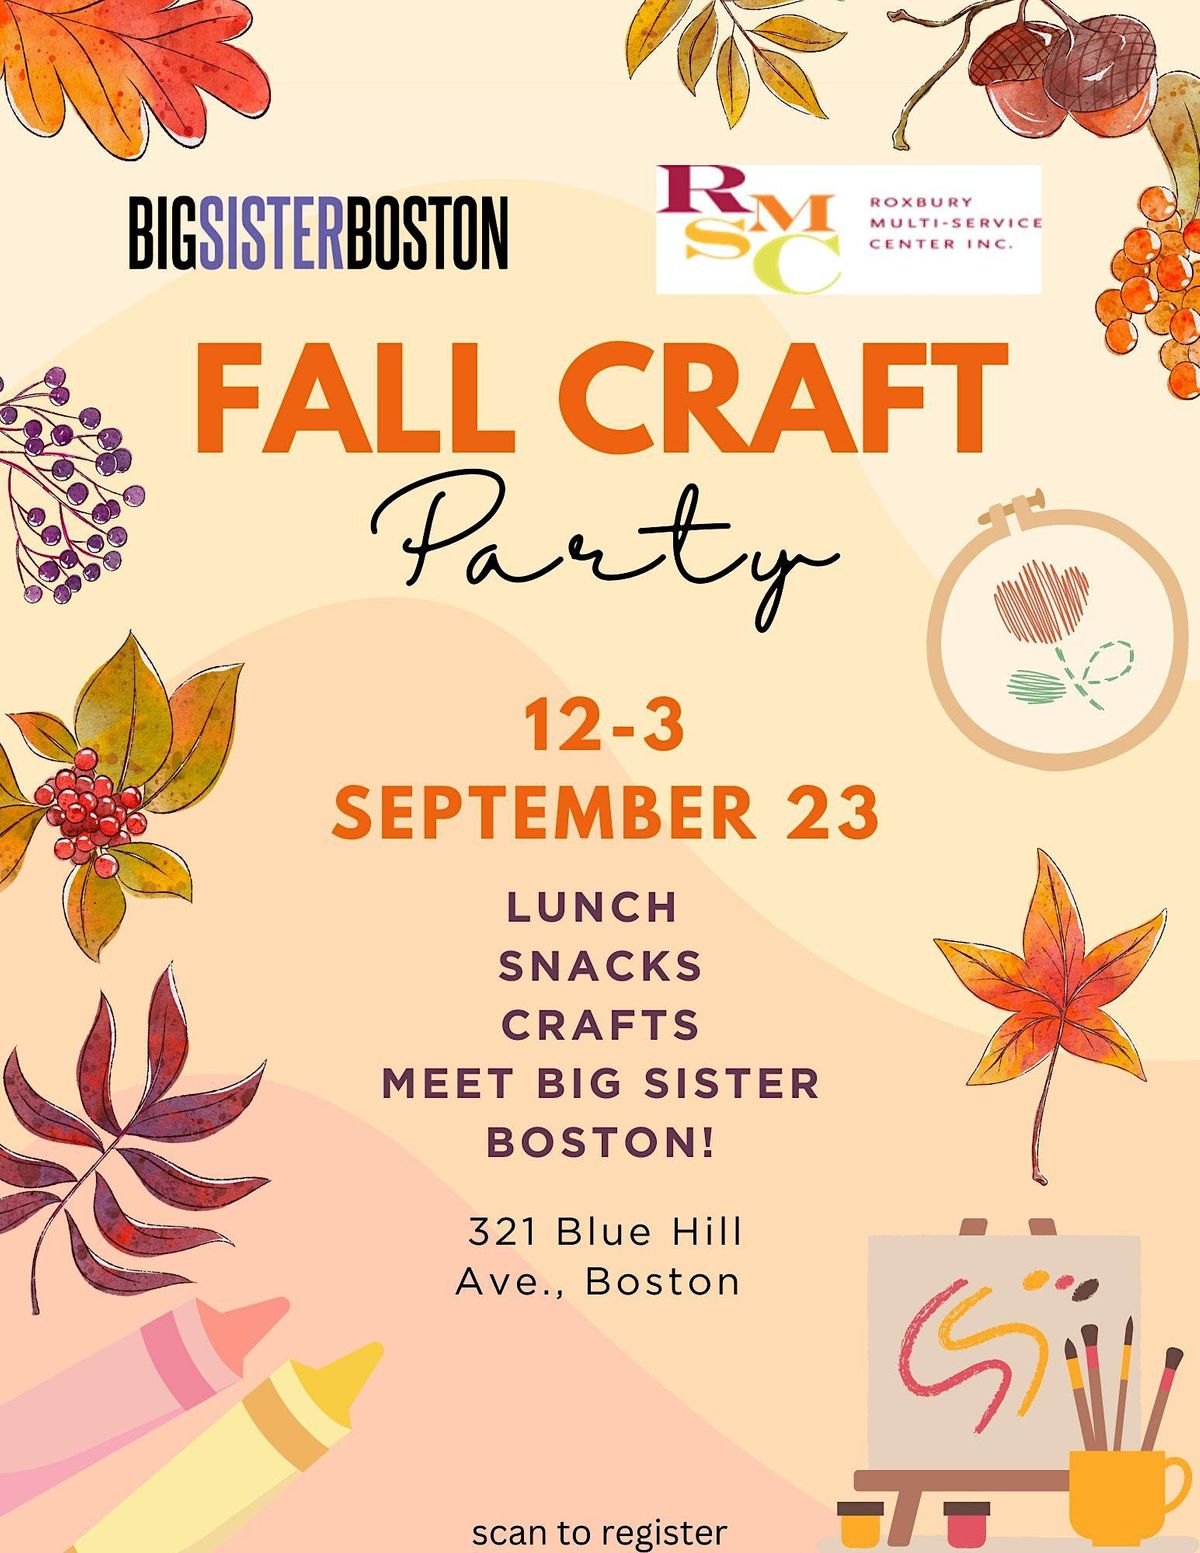 Fall Craft Party hosted by Roxbury Multiservice Center& Big Sister Boston